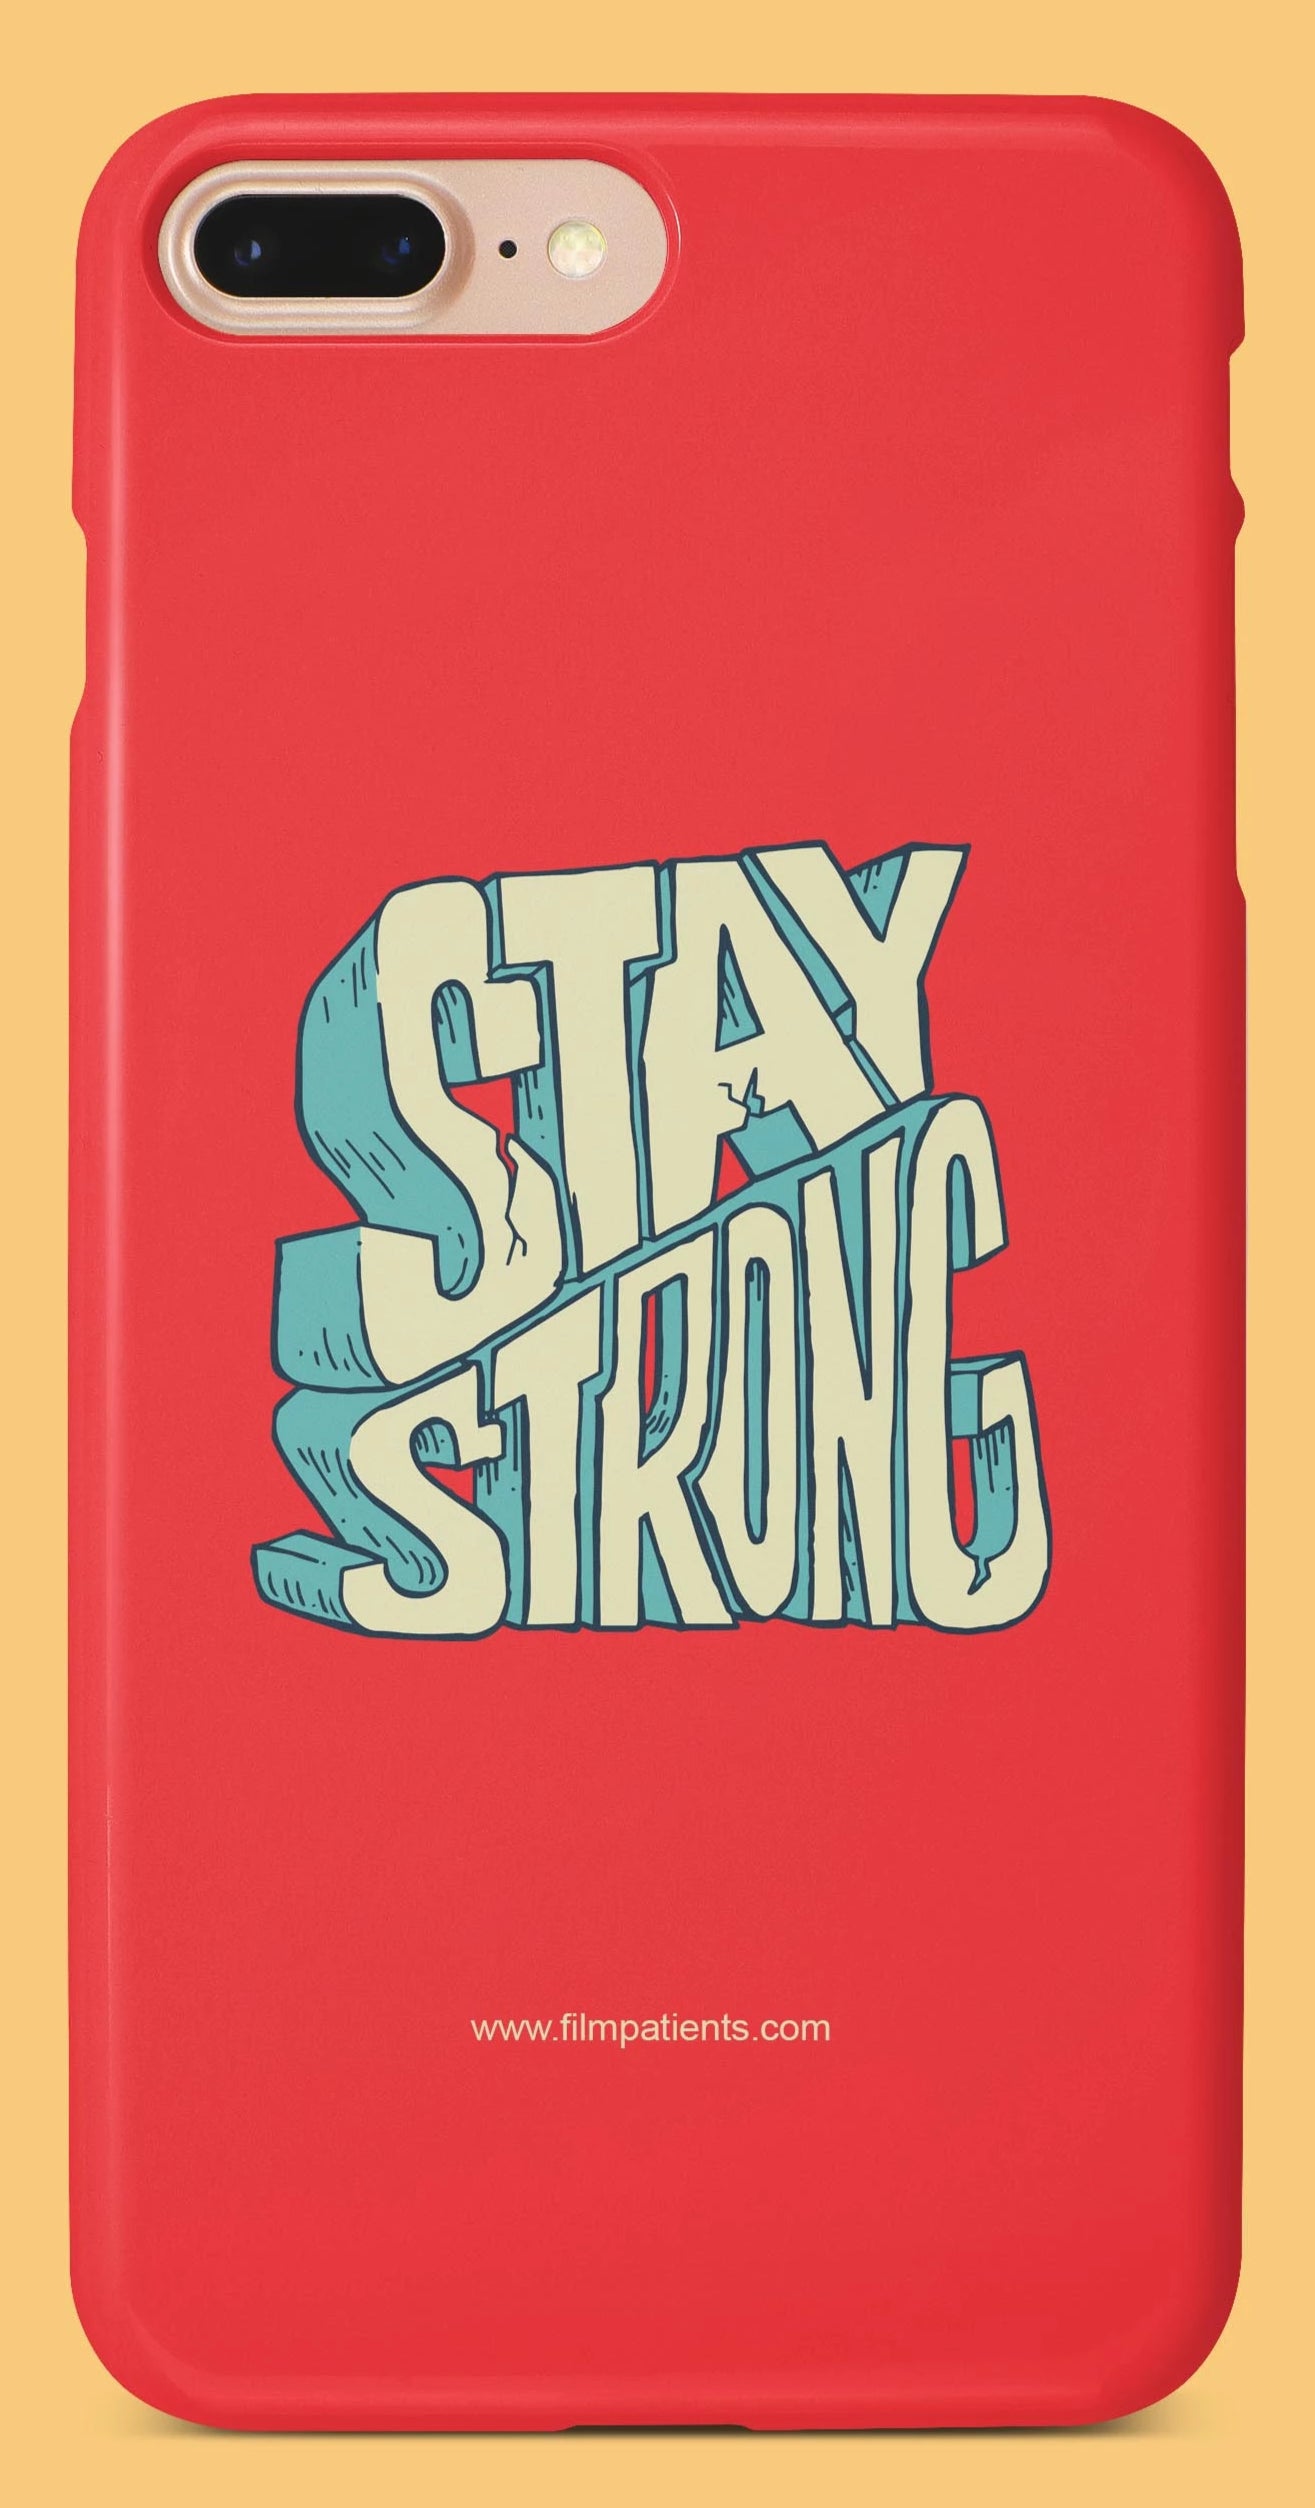 Stay Strong Mobile Cover | Film Patients